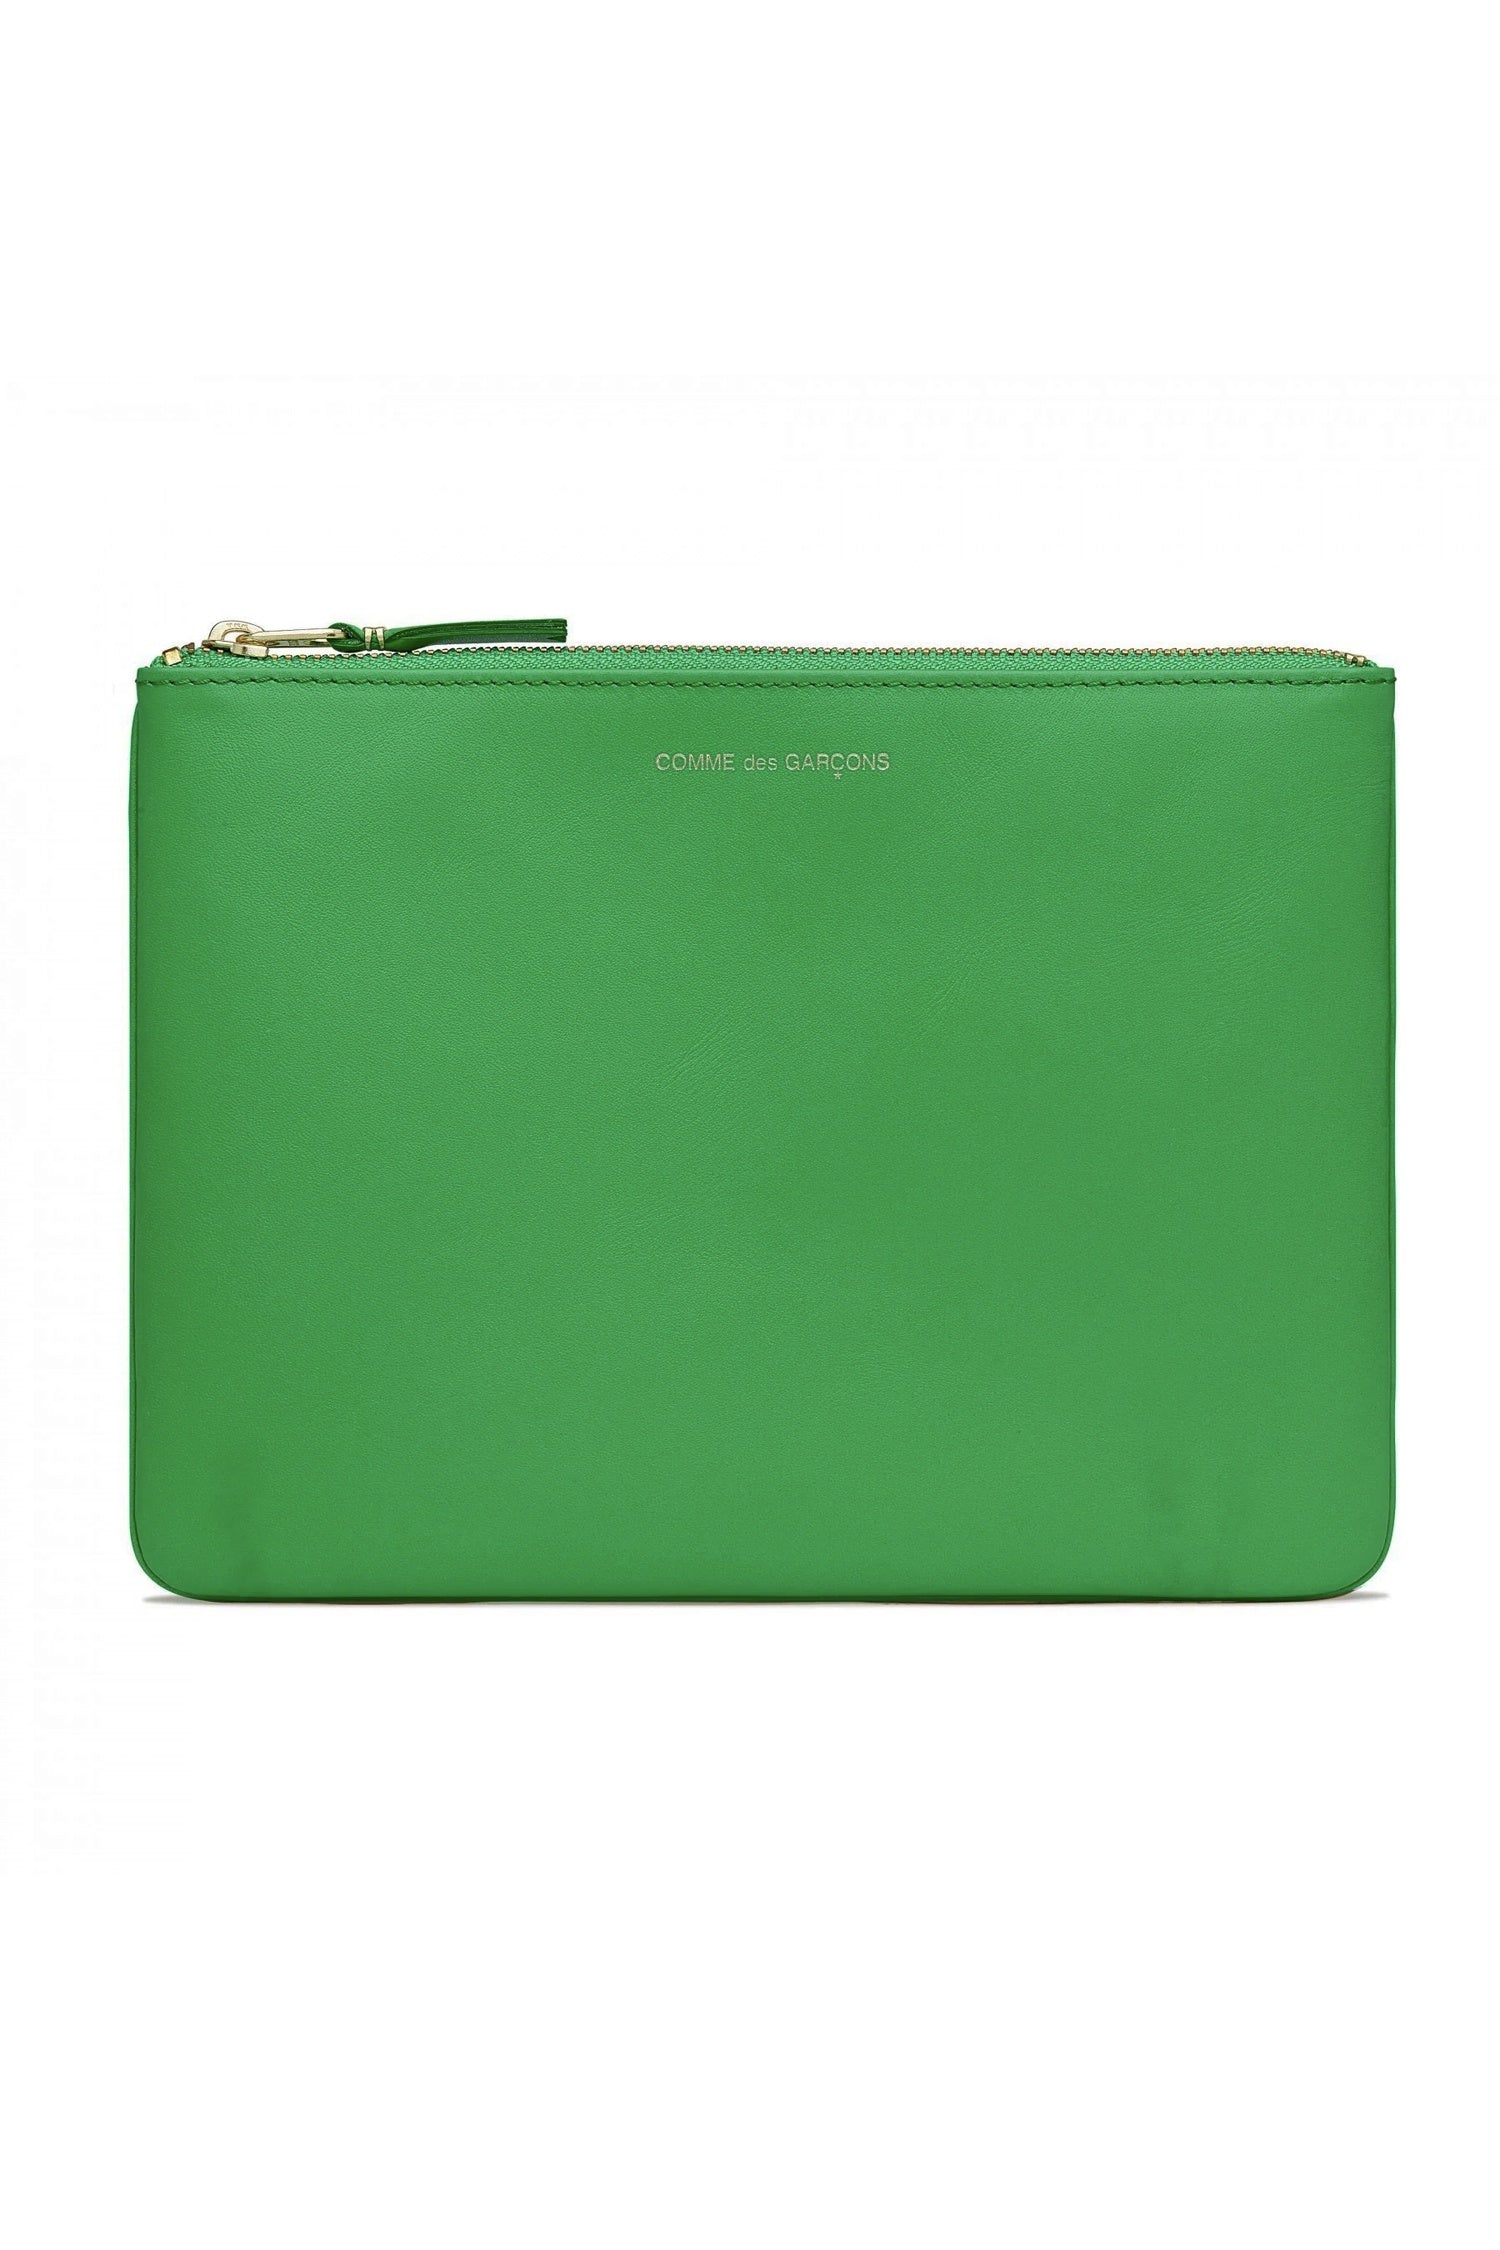 CLASSIC GROUP POUCH WALLET IN GREEN, W24